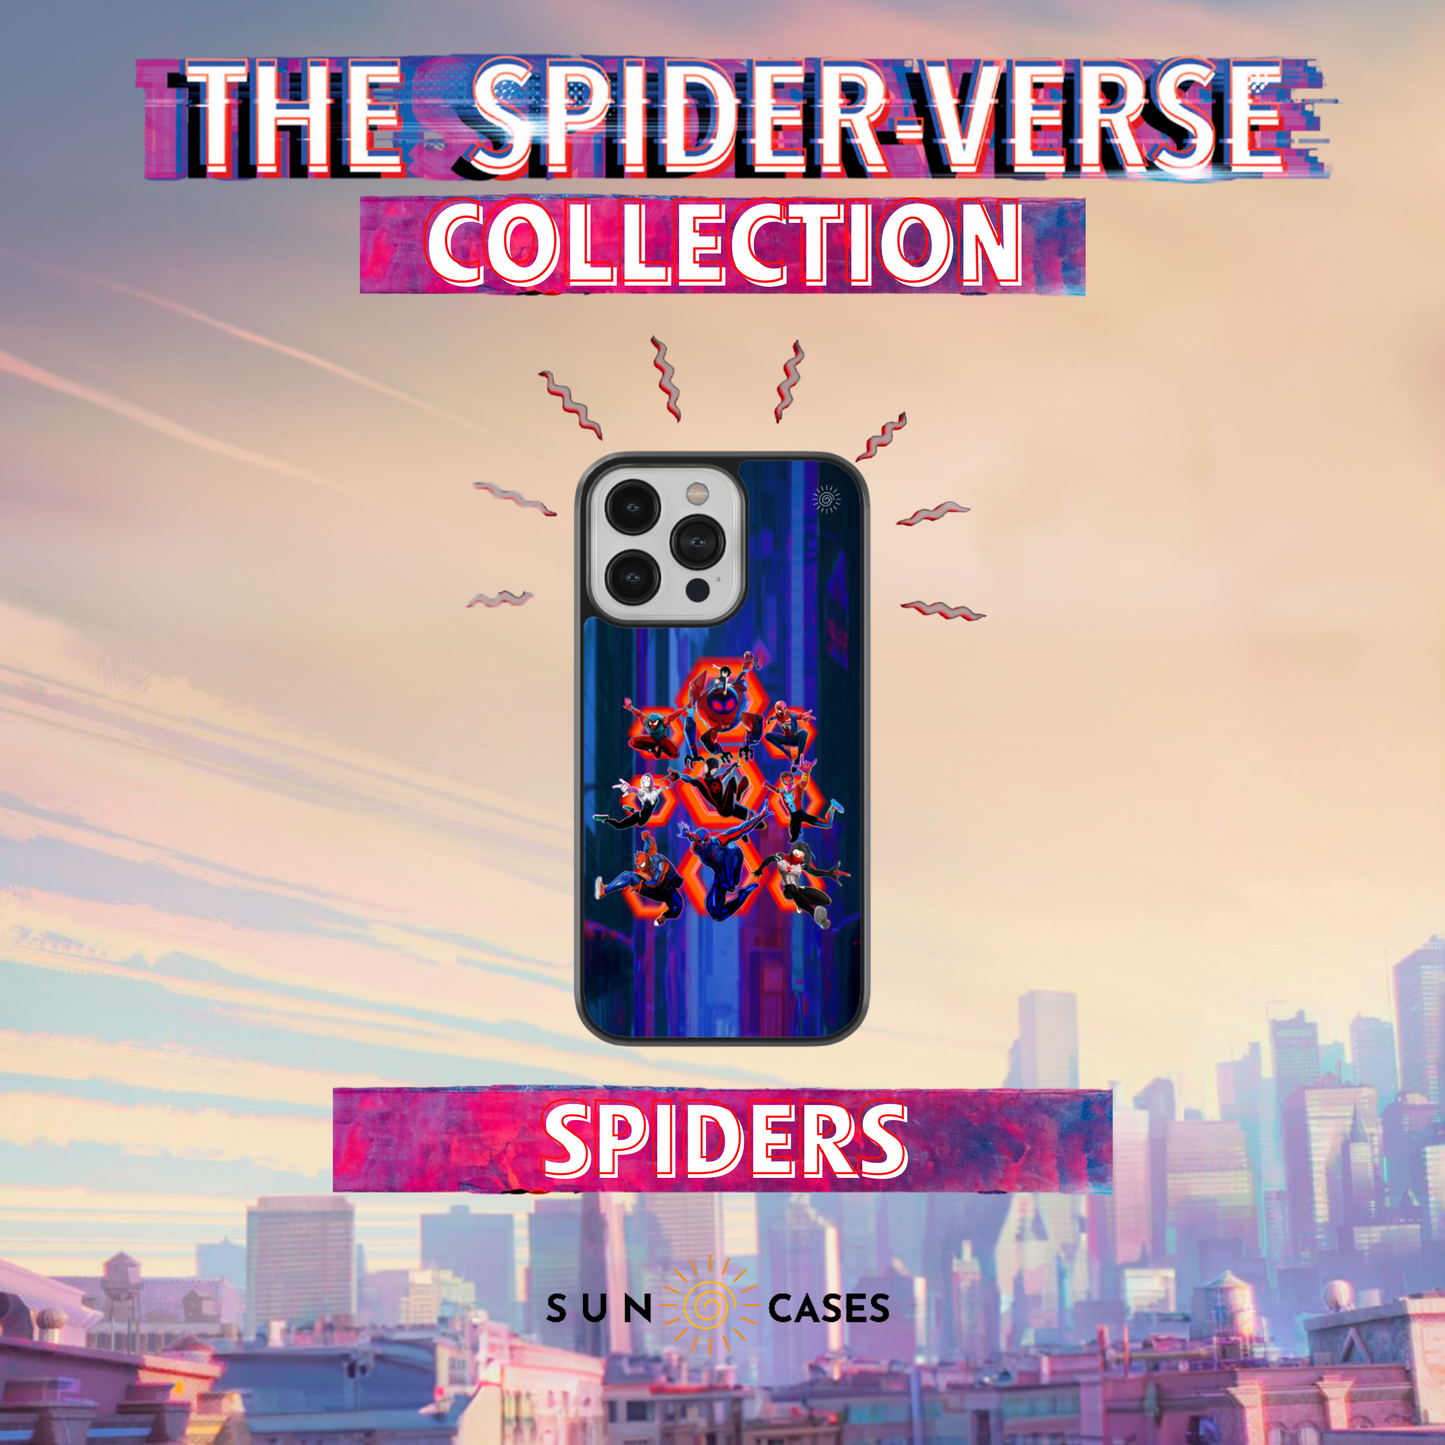 The Spider-Verse Collection - Spiders